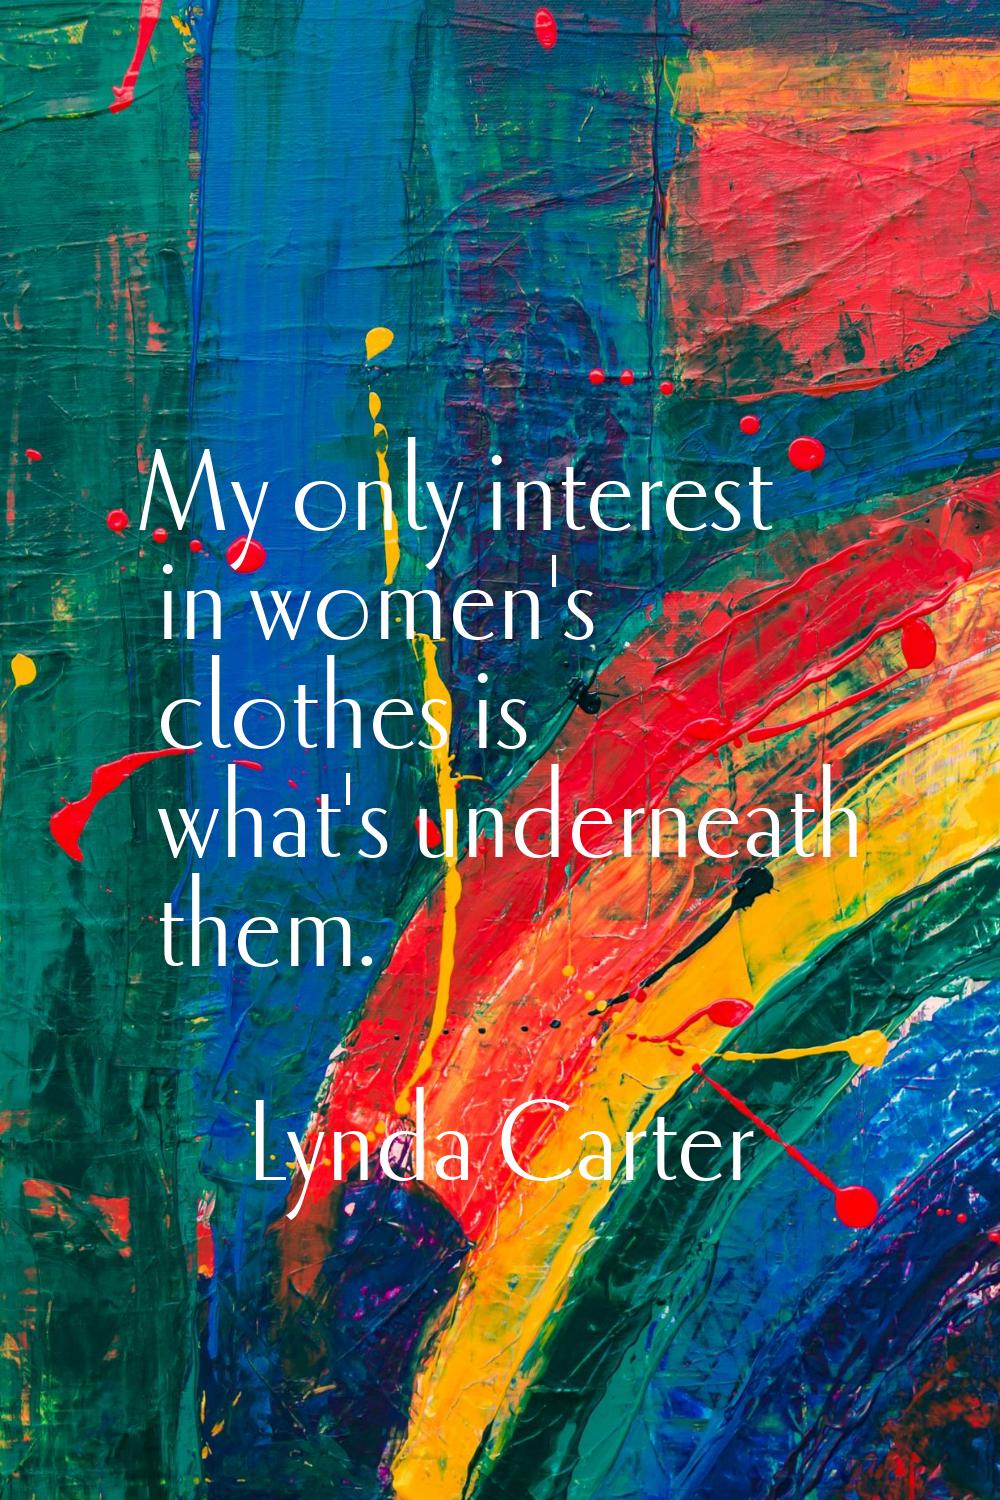 My only interest in women's clothes is what's underneath them.